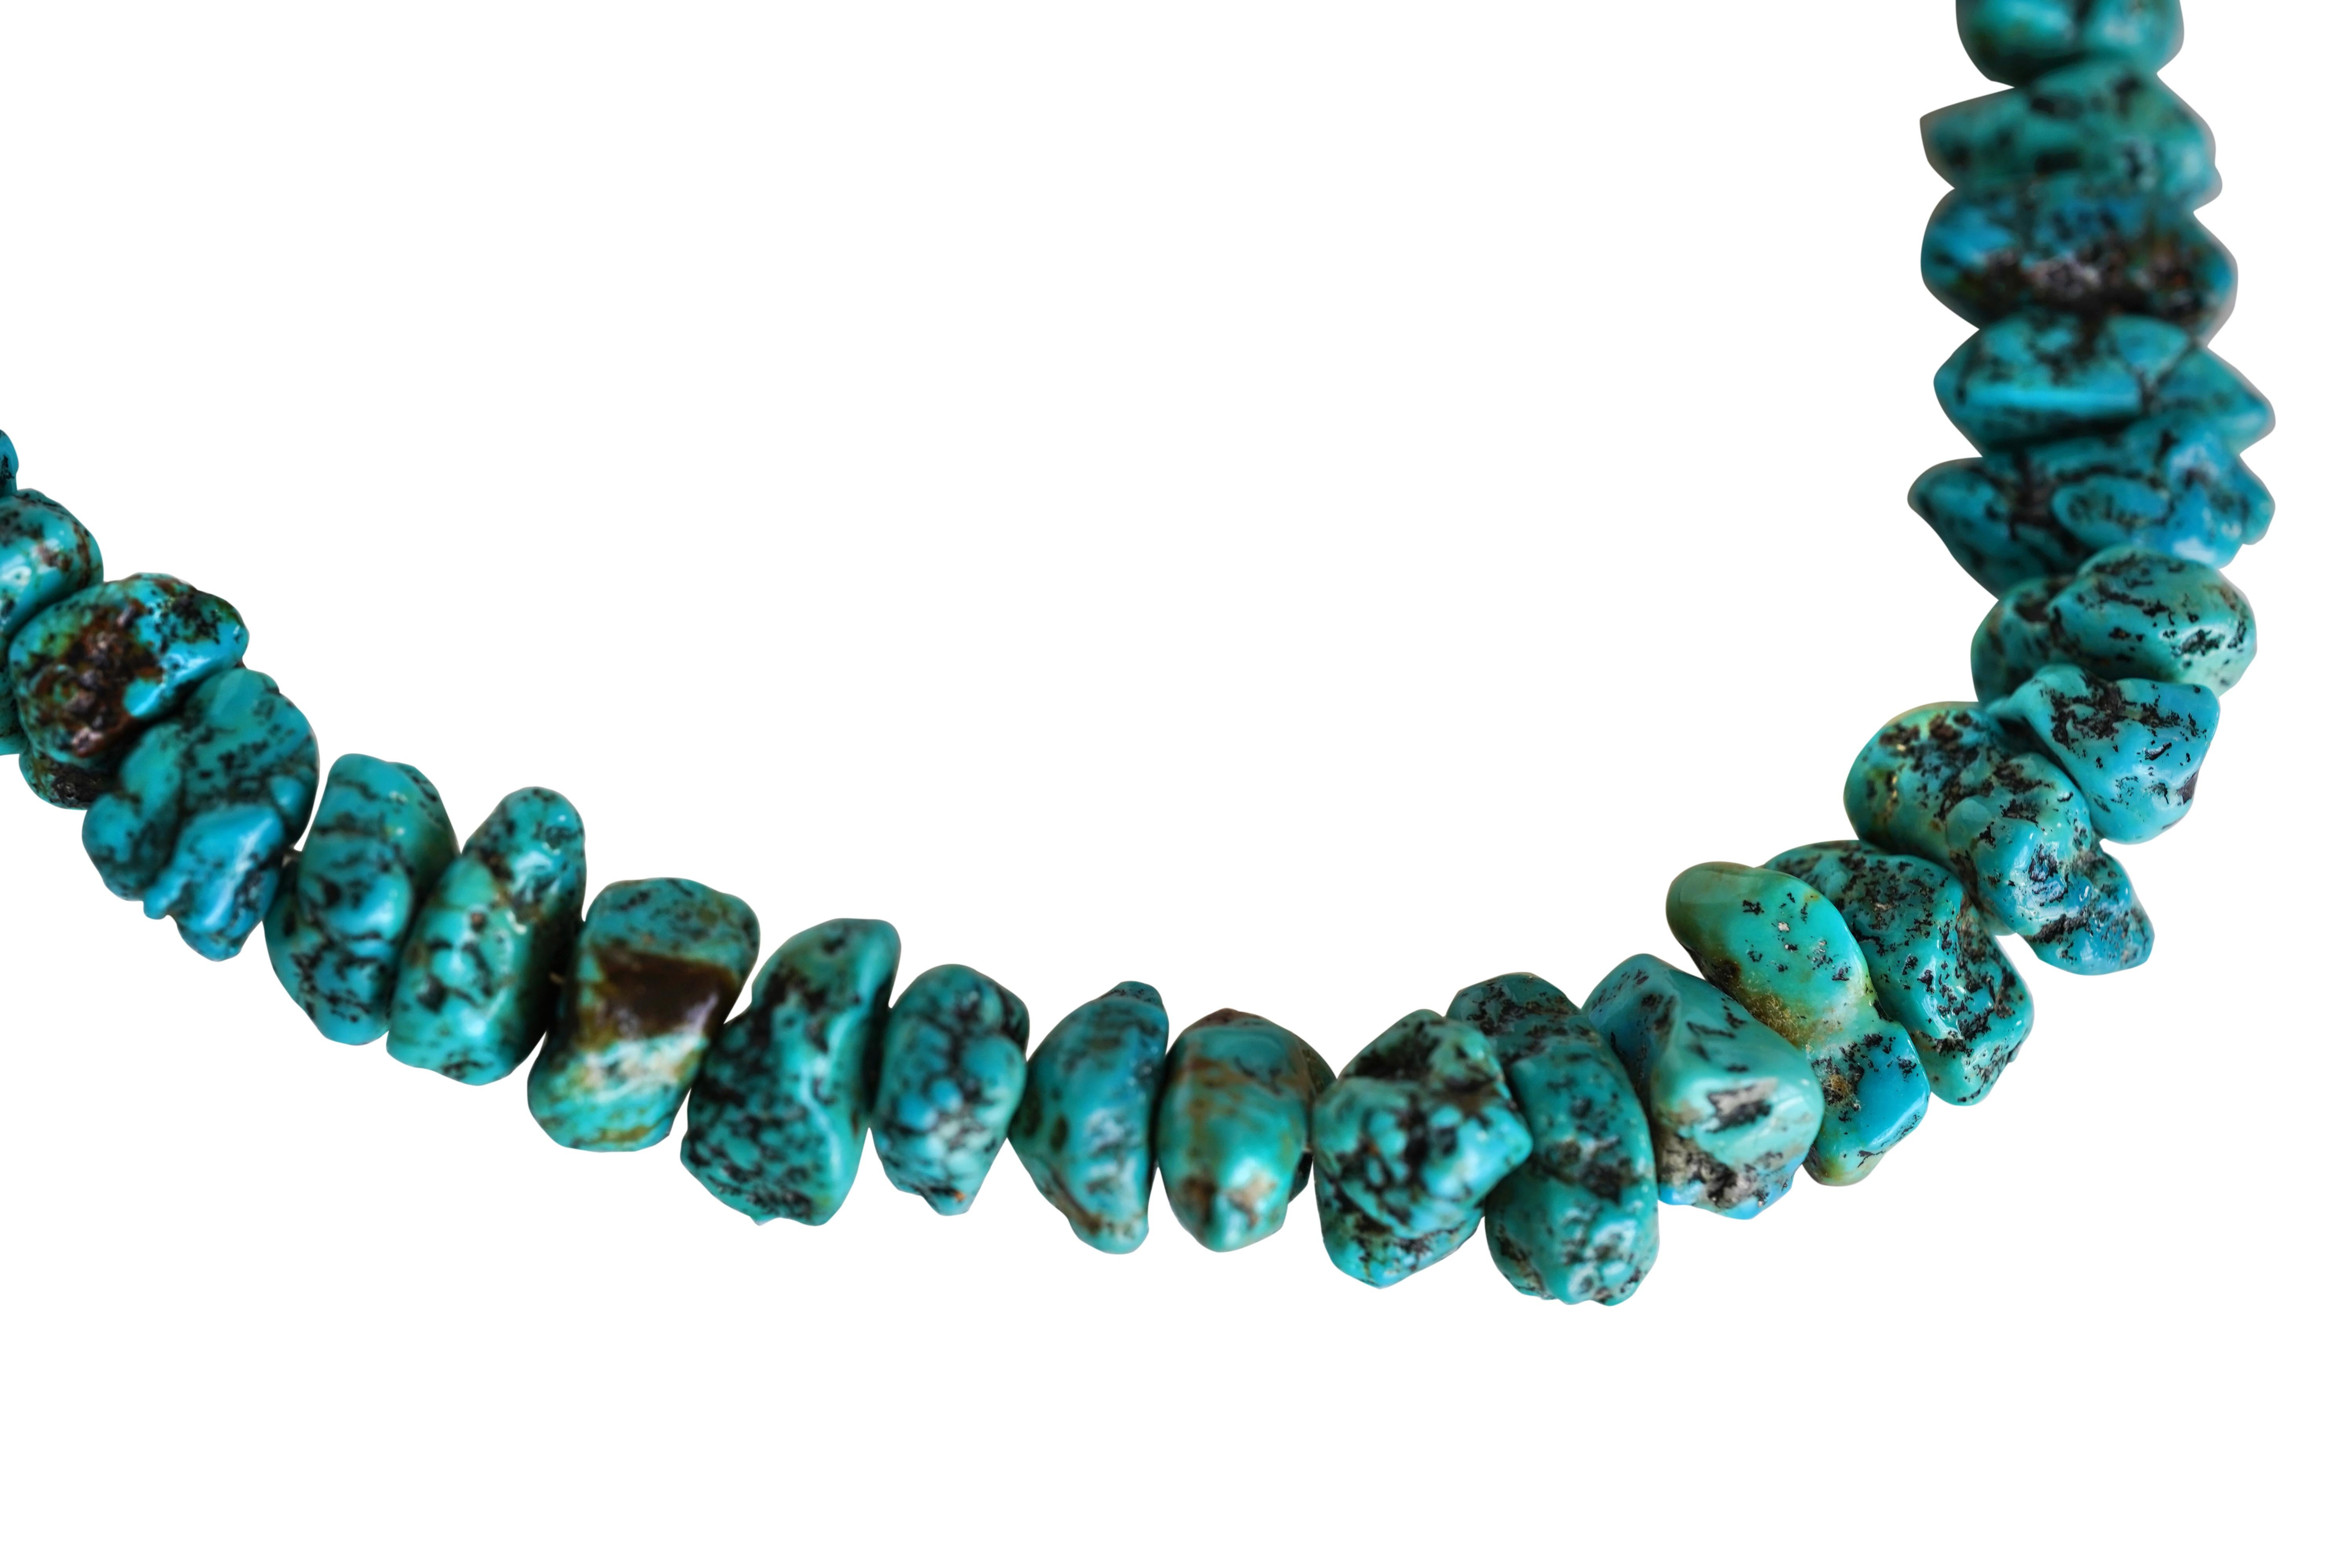 The necklace is made of 60 natural turquoise stones. Each turquoise is unique in shape and color.
Necklace length: 28.9 inches/73.4 cm.
Turquoise dimensions: the largest stone is 19.2 mm length, 13.7 mm width and 8.31 mm thickness. The smallest